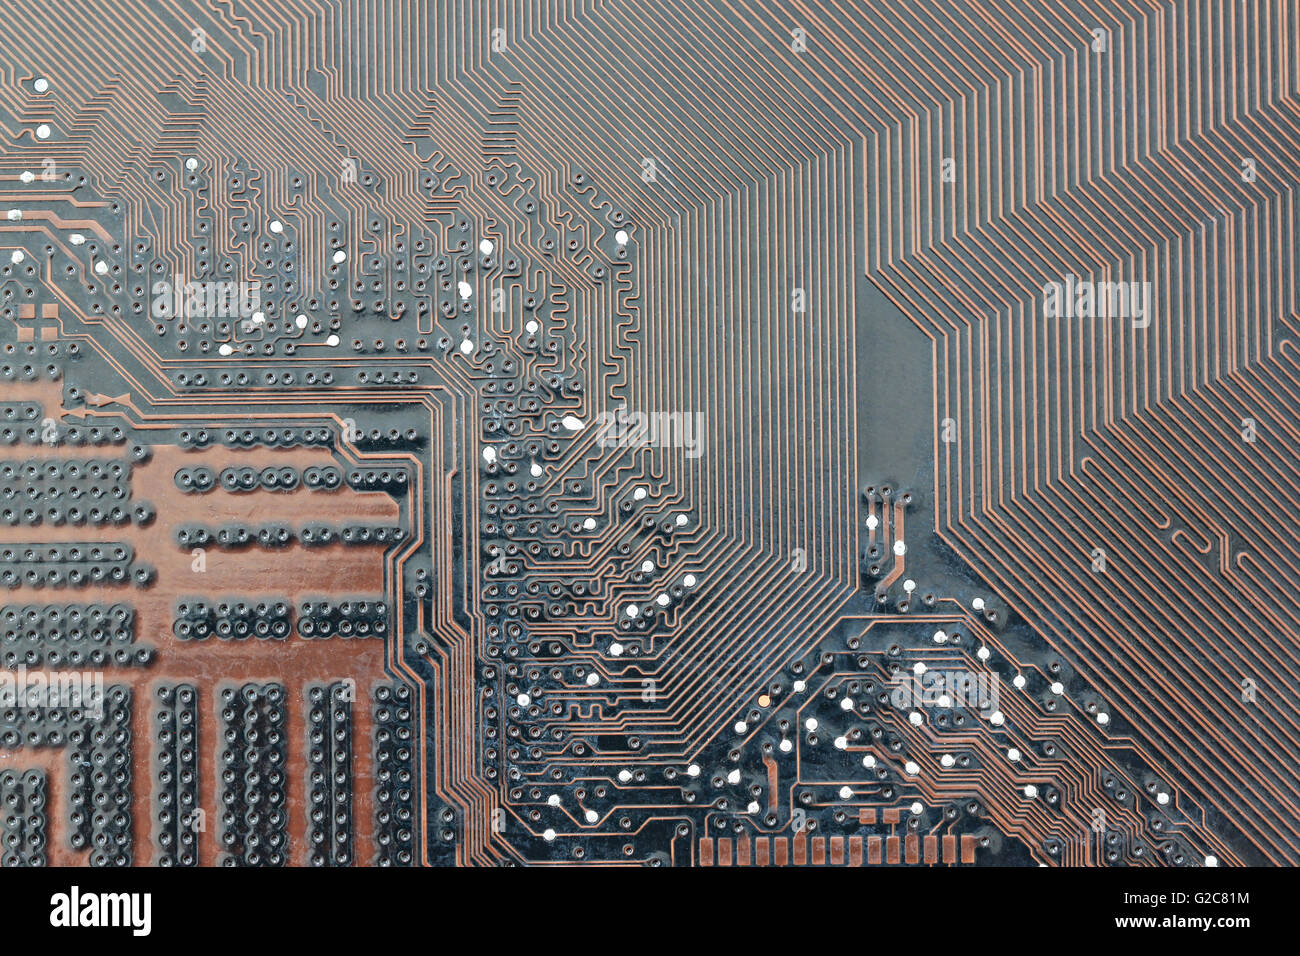 brown electronics background of computer mainboard and have concept about technology. Stock Photo